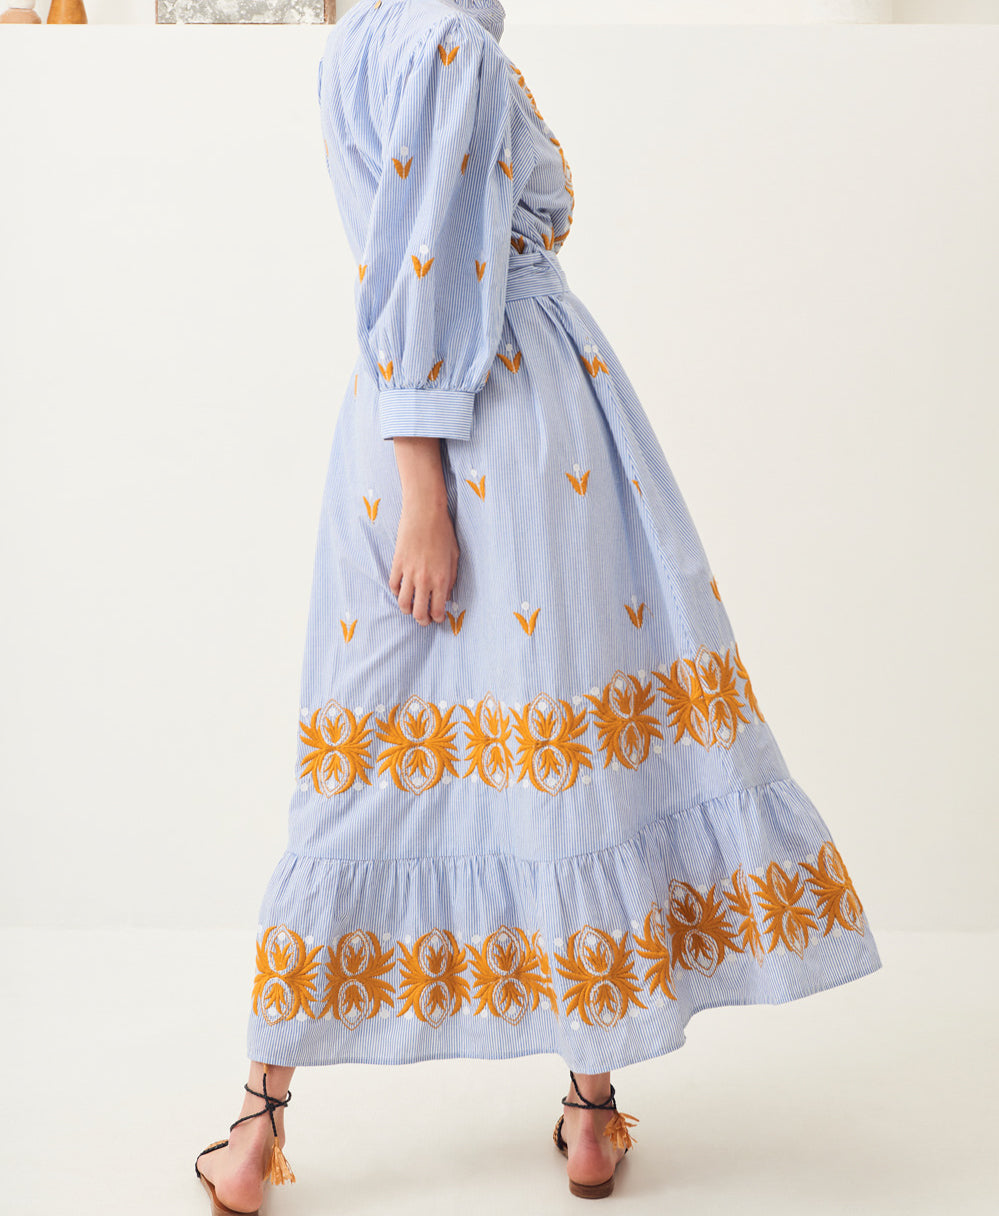 Mexica Puff Sleeve Embroidered Long Dress